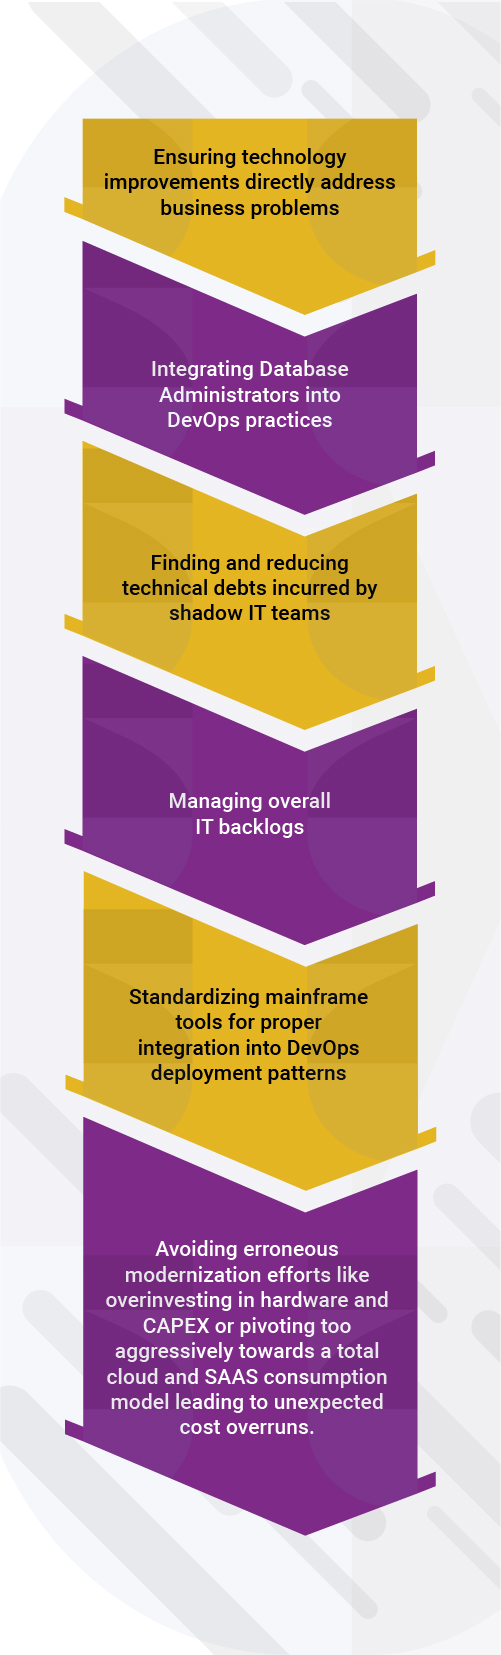 A chevron-styled infographic highlighting six overlooked areas in modernization that can impact speed and scale. The areas include: 1) addressing business problems with technology improvements, 2) integrating Database Administrators into DevOps practices, 3) identifying and reducing technical debts from shadow IT teams, 4) managing IT backlogs, 5) standardizing mainframe tools for DevOps integration, and 6) avoiding pitfalls such as overinvesting in hardware and capital expenditure or and too to Cloud and SaaS models.